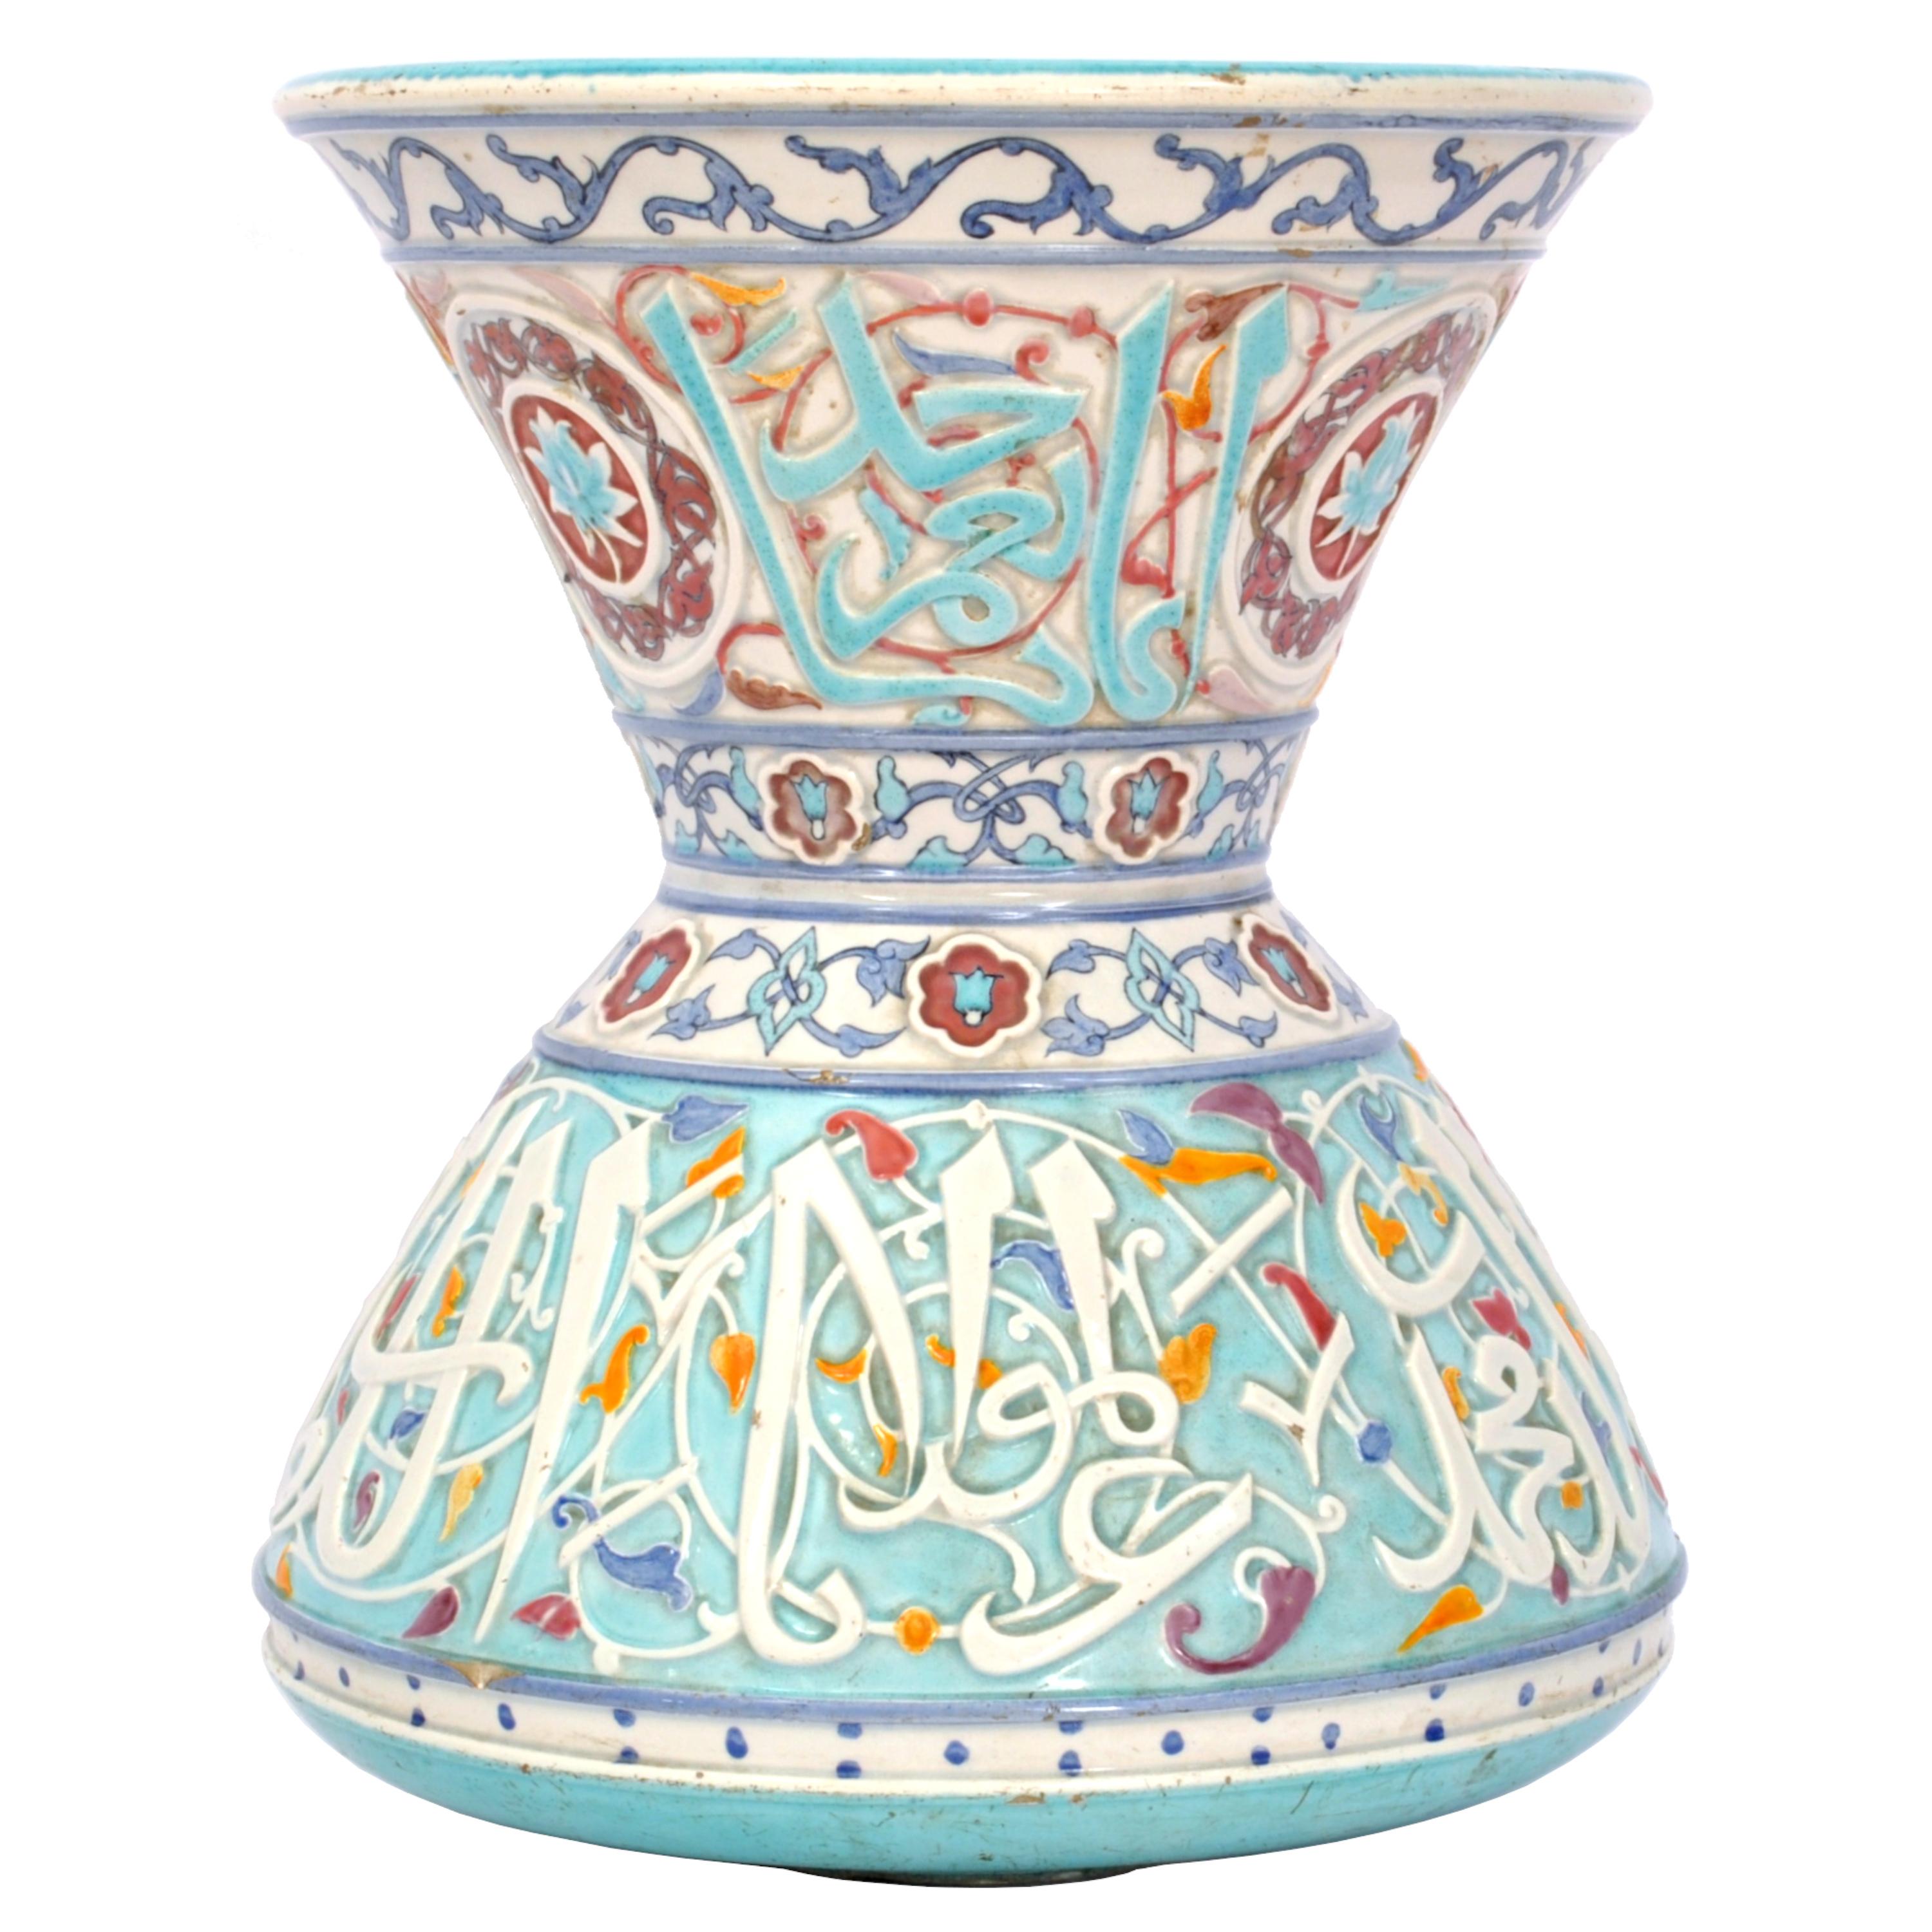 Late 19th Century Antique Islamic Mamluk Style Faience Pottery Mosque Lamp Theodore Deck 1880